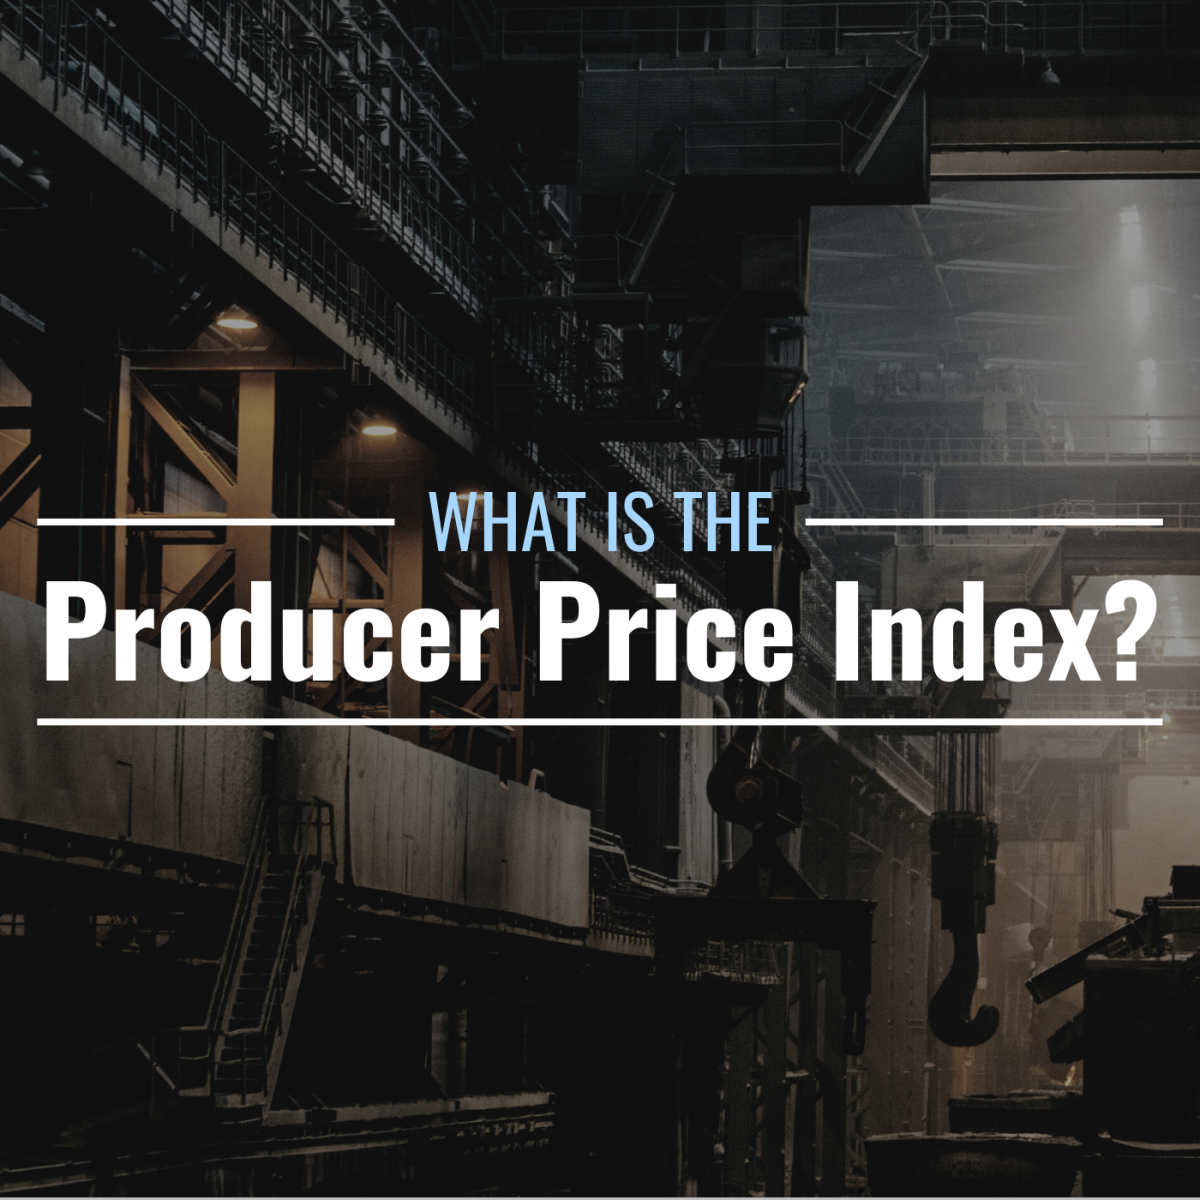 Darkened photo of the inside of a manufacturing plant with text overlay that reads "What Is the Producer Price Index?"